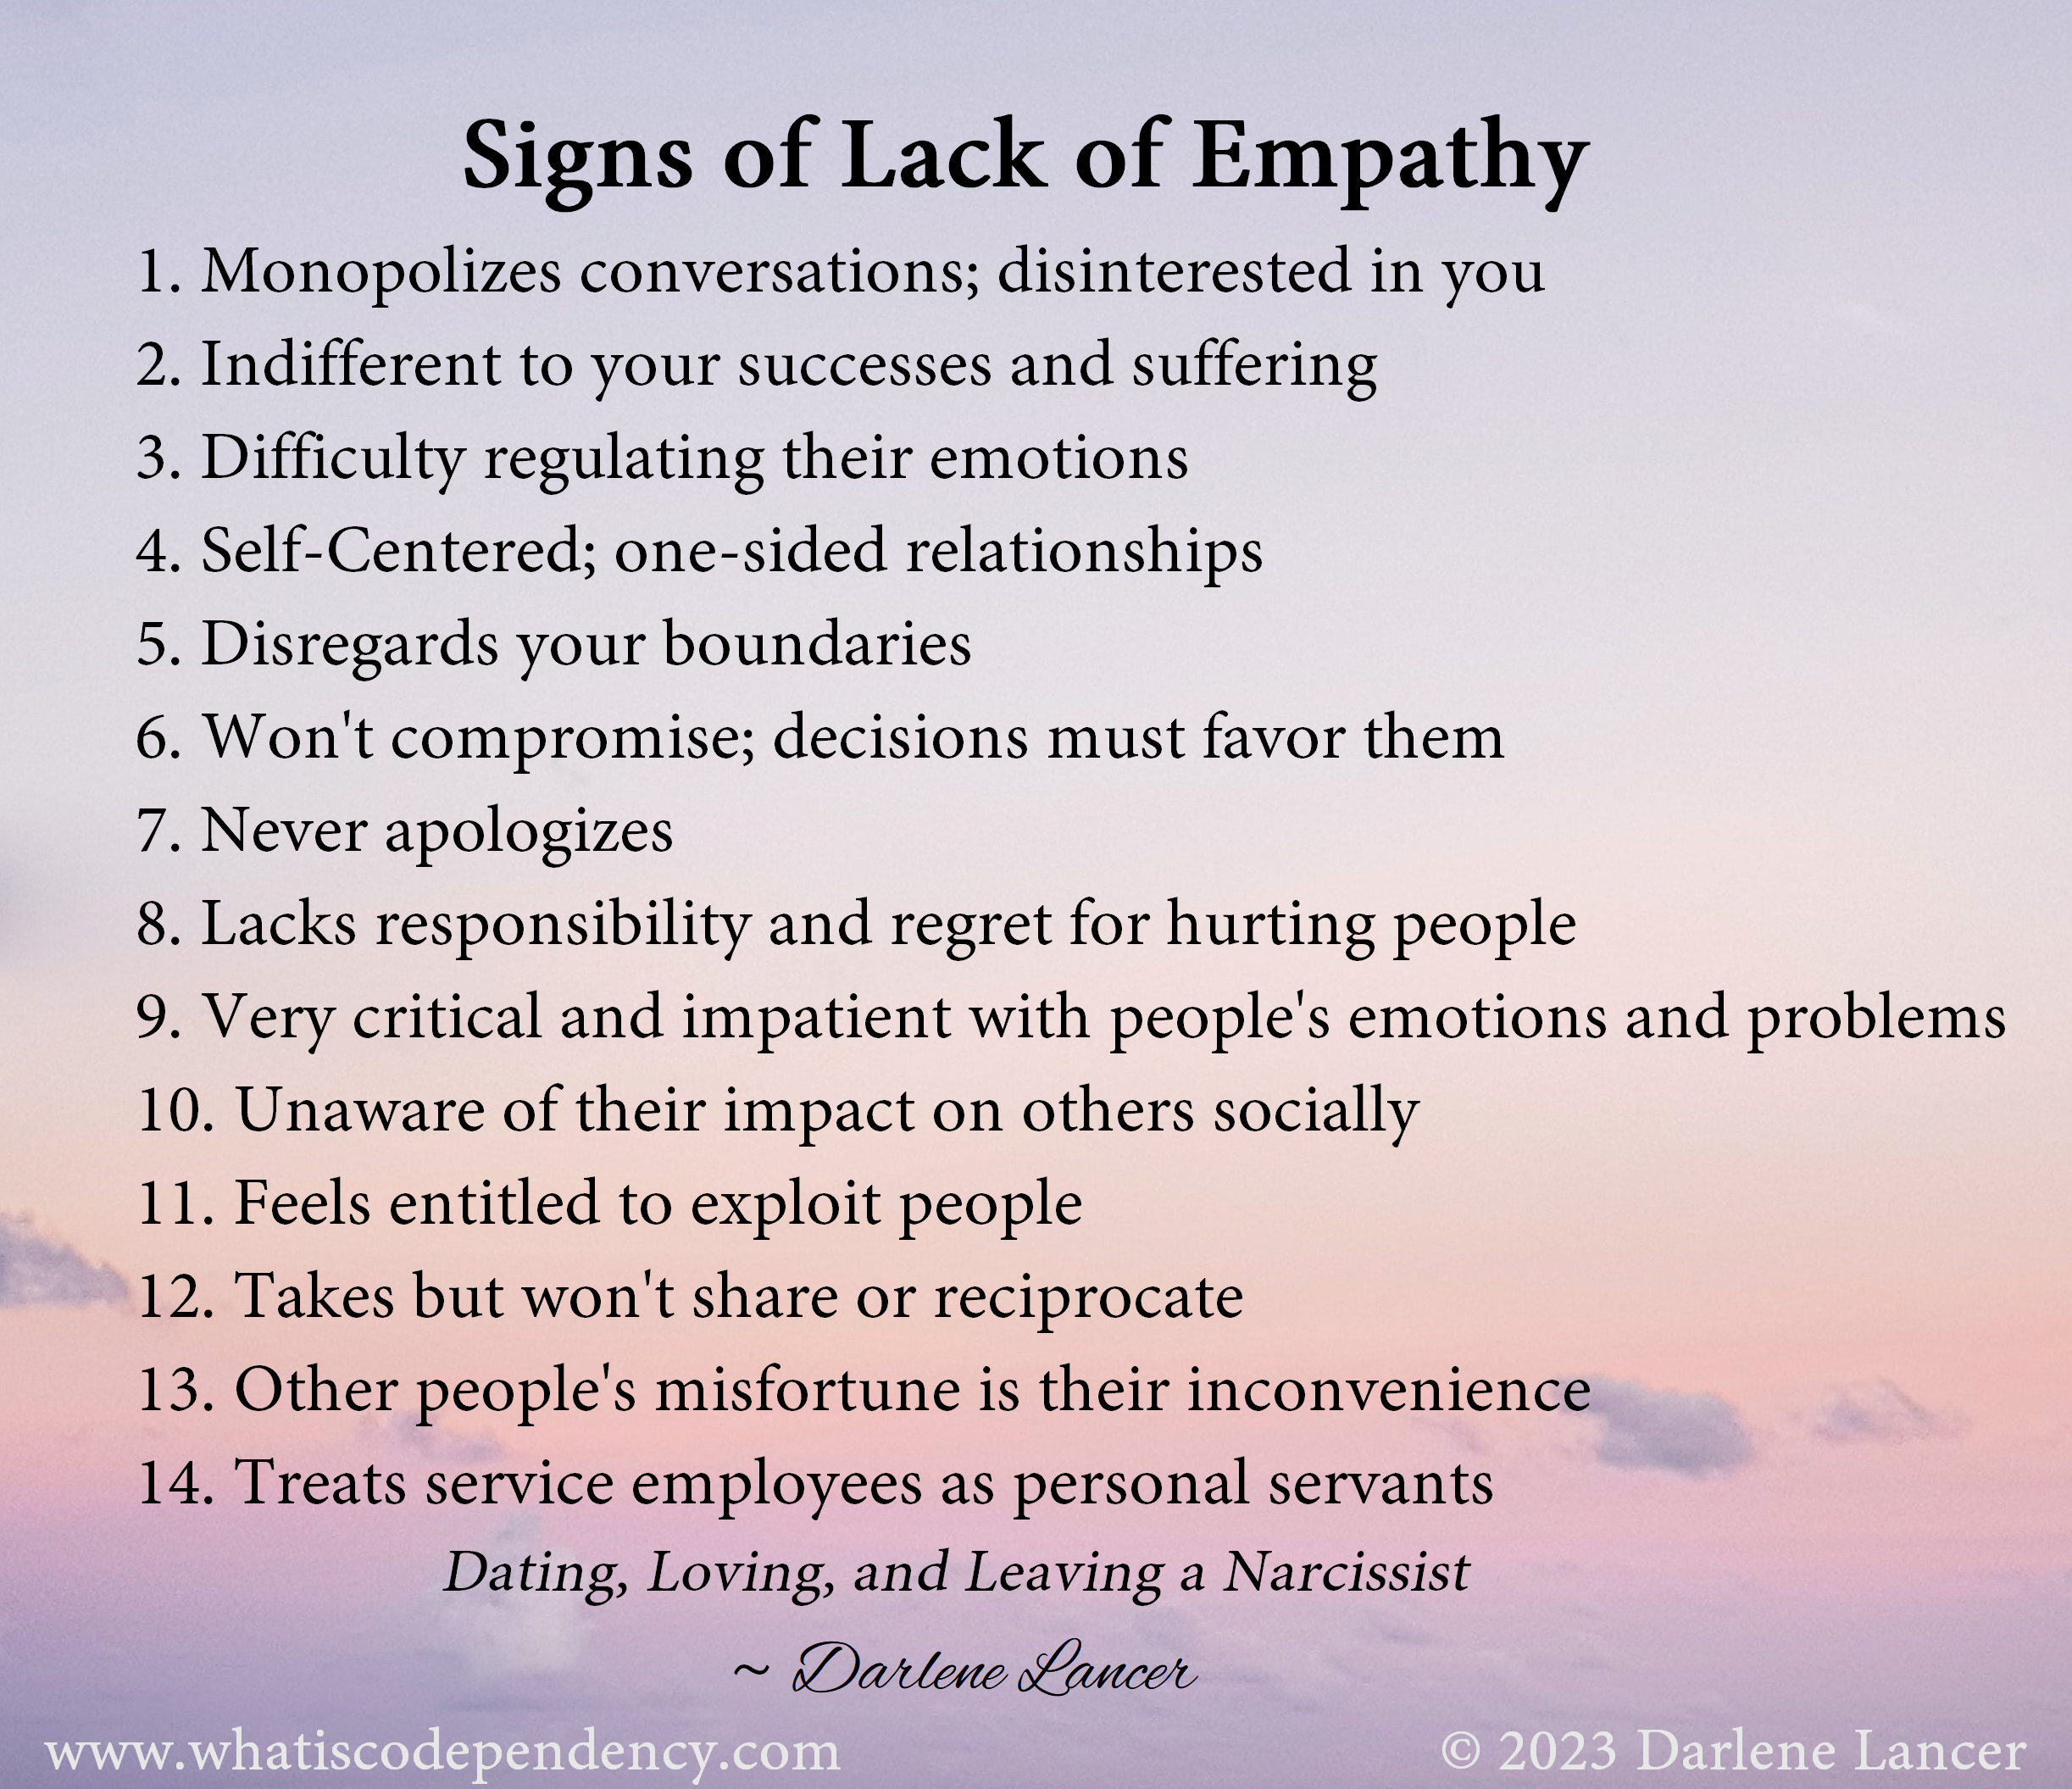 Signs of Lack of Empathy